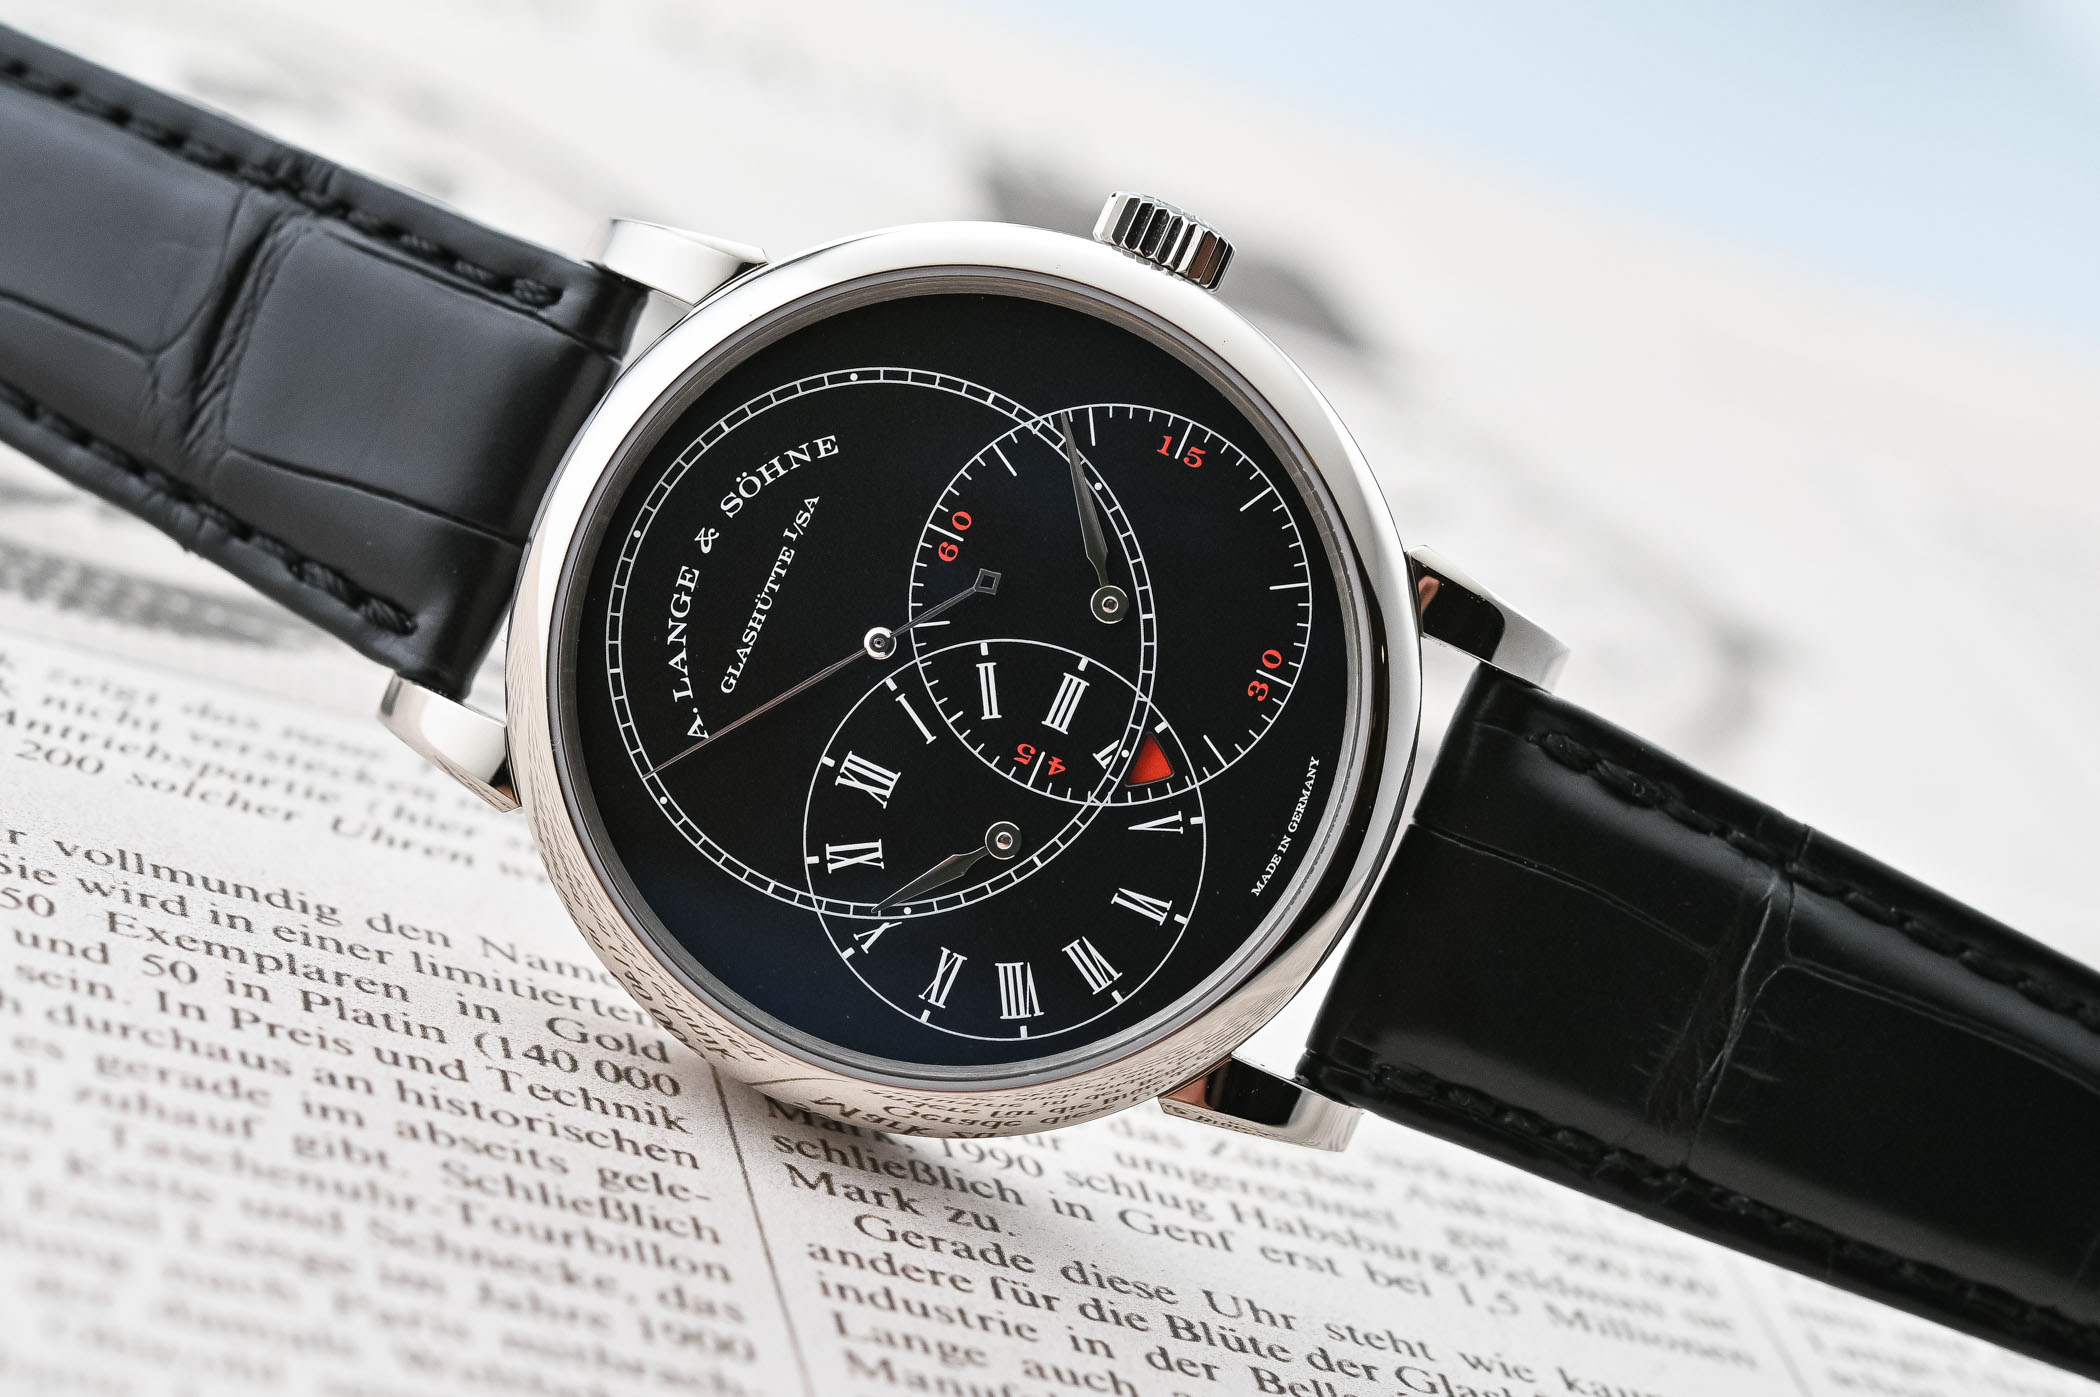 A Lange Sohne Richard Lange Jumping Seconds White Gold and Black Dial - SIHH 2019 - review - 11